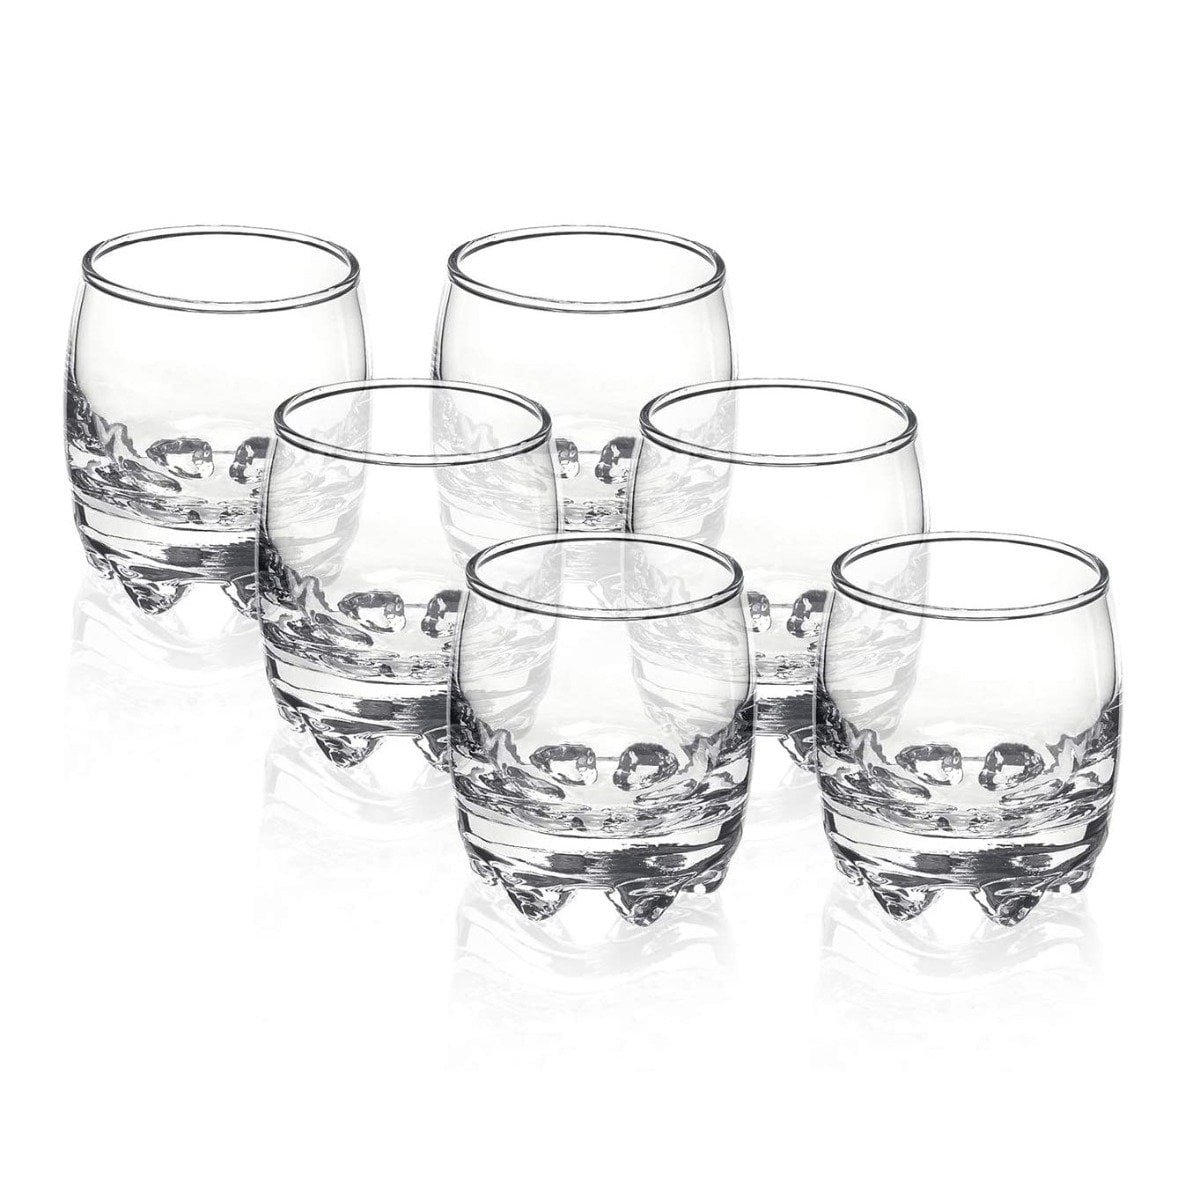 SHIHUALINE 300ml handle Cup with 15ml Cups Unique Mini Wine Shot Glasses  Sake Spirits Cup Clear Alco…See more SHIHUALINE 300ml handle Cup with 15ml